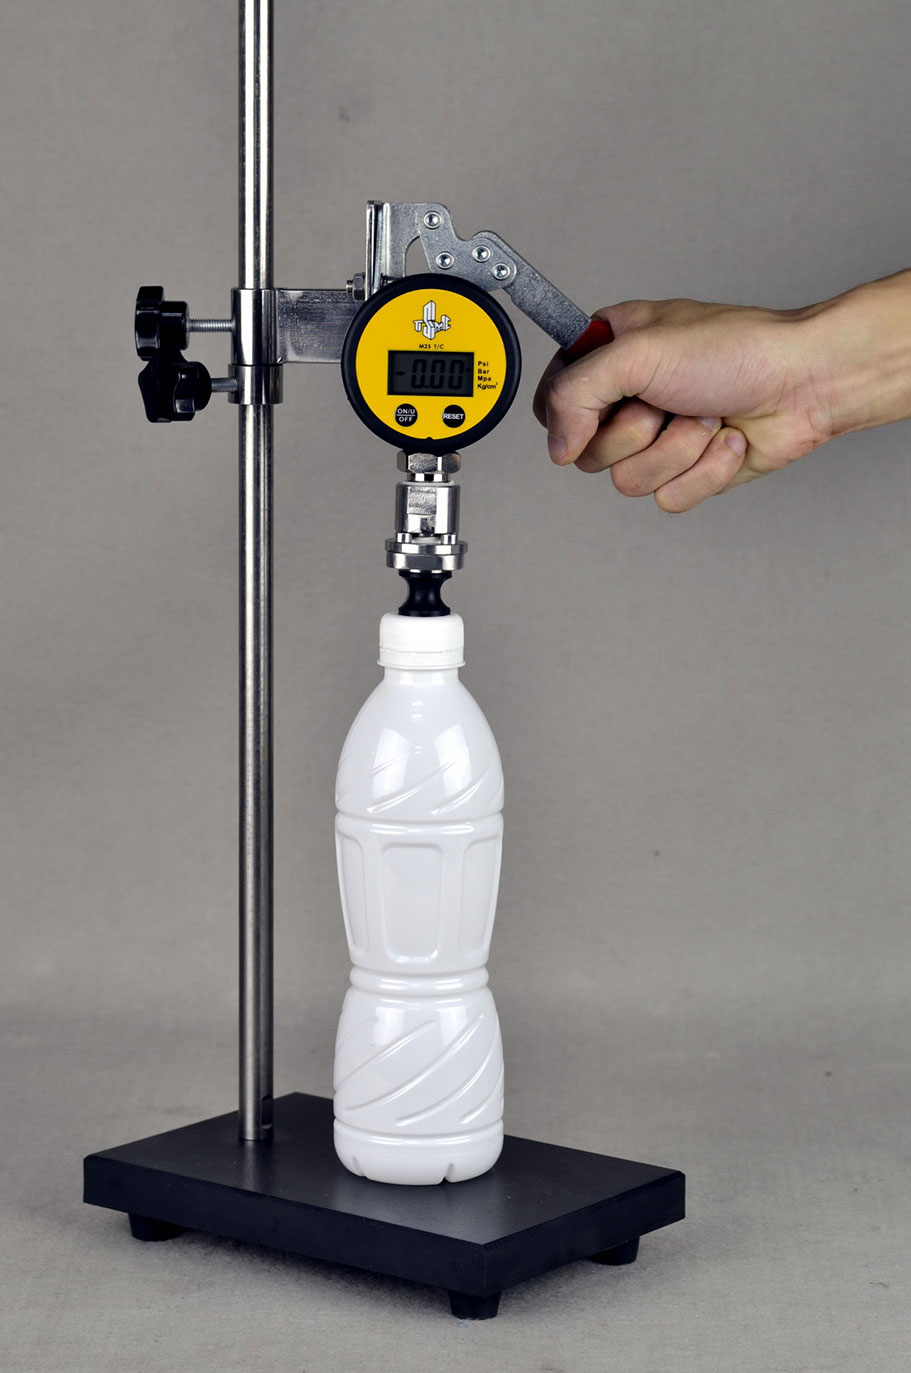 PVG-A/PVG-D Pressure or Vacuum Gauge (Simple Pressure or Vacuum Tester for Can and Bottle)-image